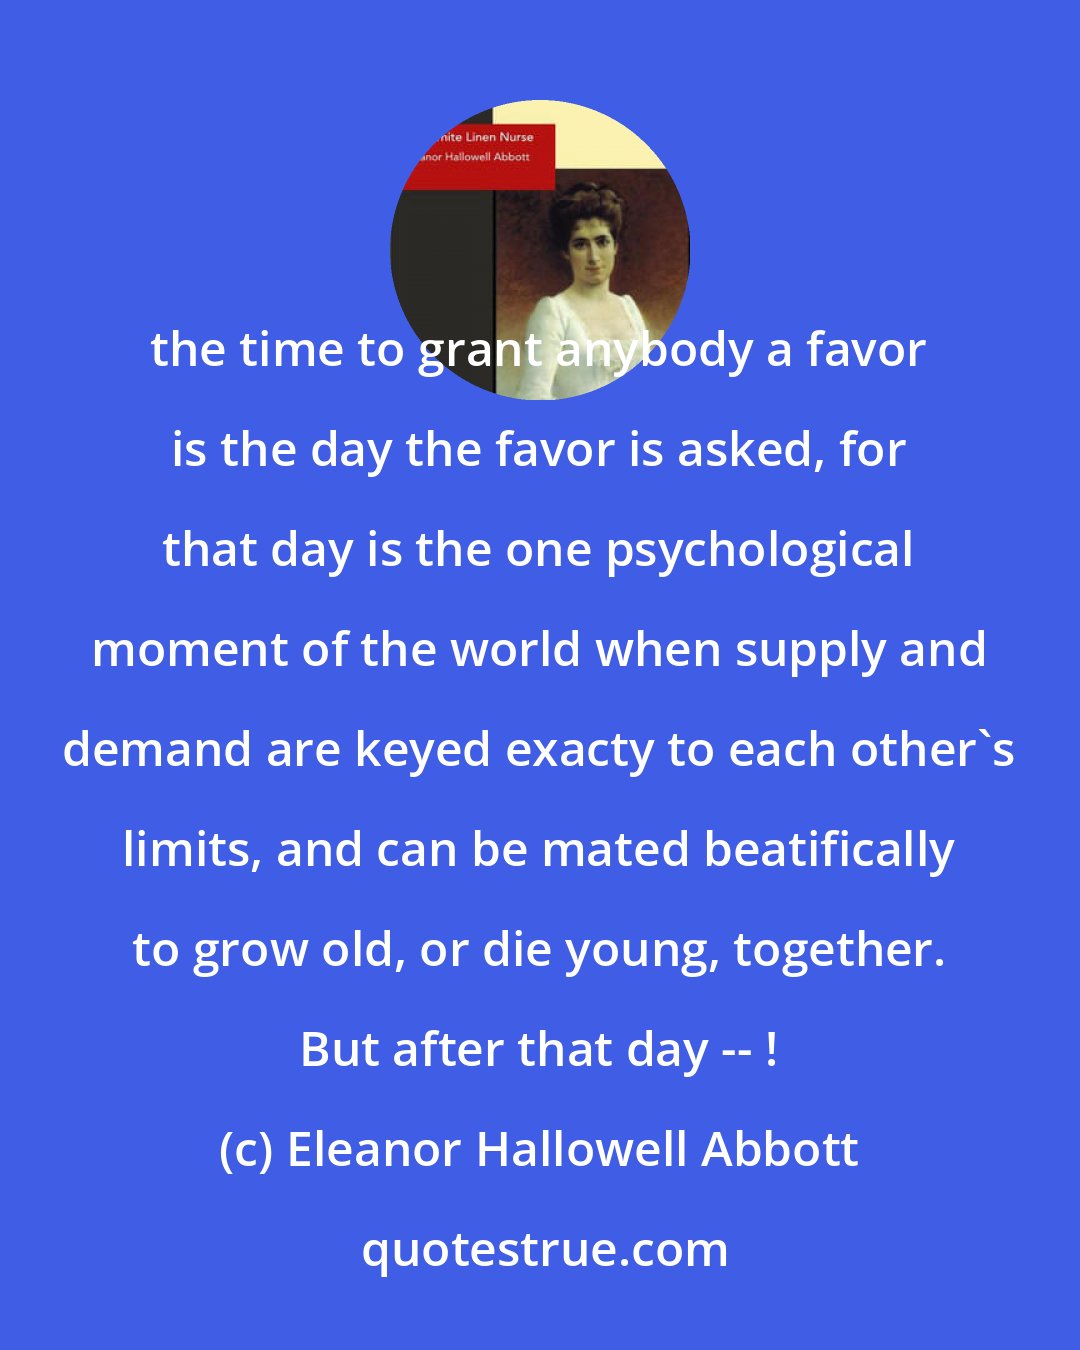 Eleanor Hallowell Abbott: the time to grant anybody a favor is the day the favor is asked, for that day is the one psychological moment of the world when supply and demand are keyed exacty to each other's limits, and can be mated beatifically to grow old, or die young, together. But after that day -- !